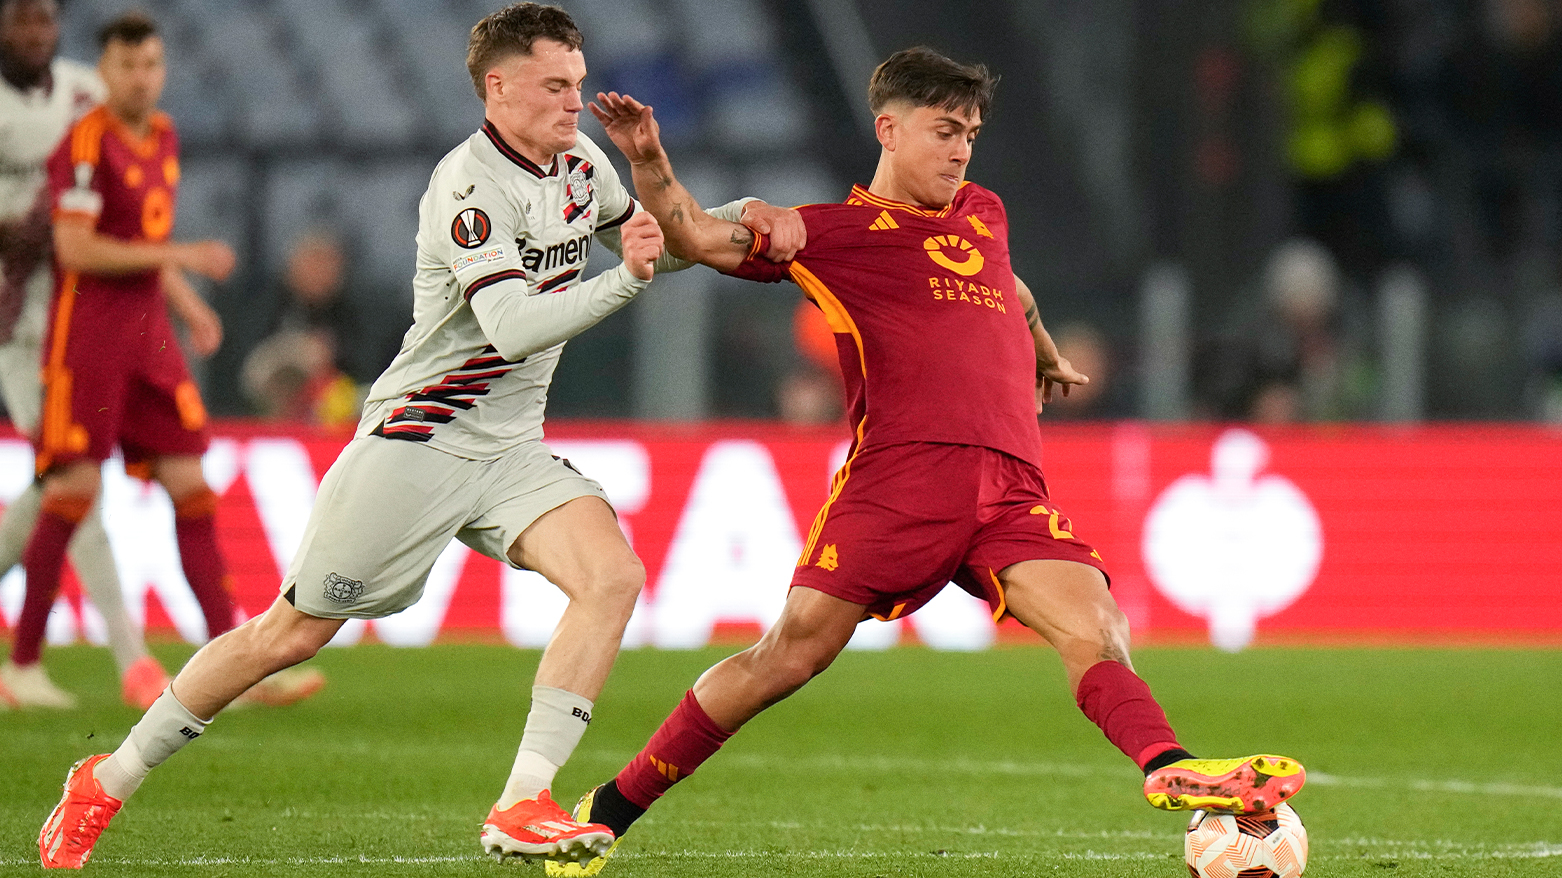 Roma's Paulo Dybala, right, challenges for the ball with Leverkusen's Florian Wirtz during the Europa League semifinal first leg. (Photo: AP)